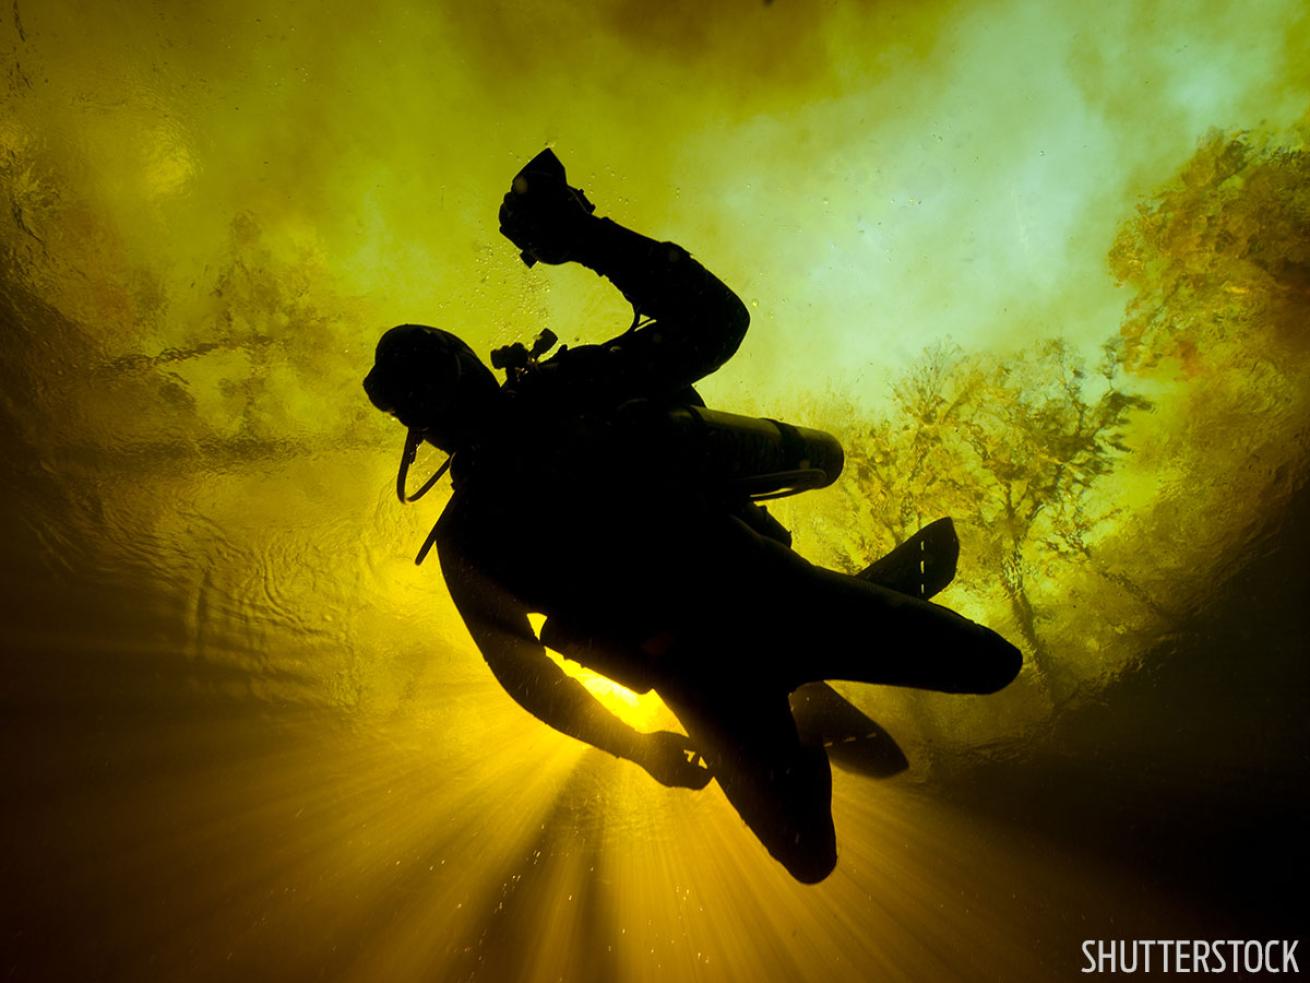 Scuba diver silhouetted in Florida spring  